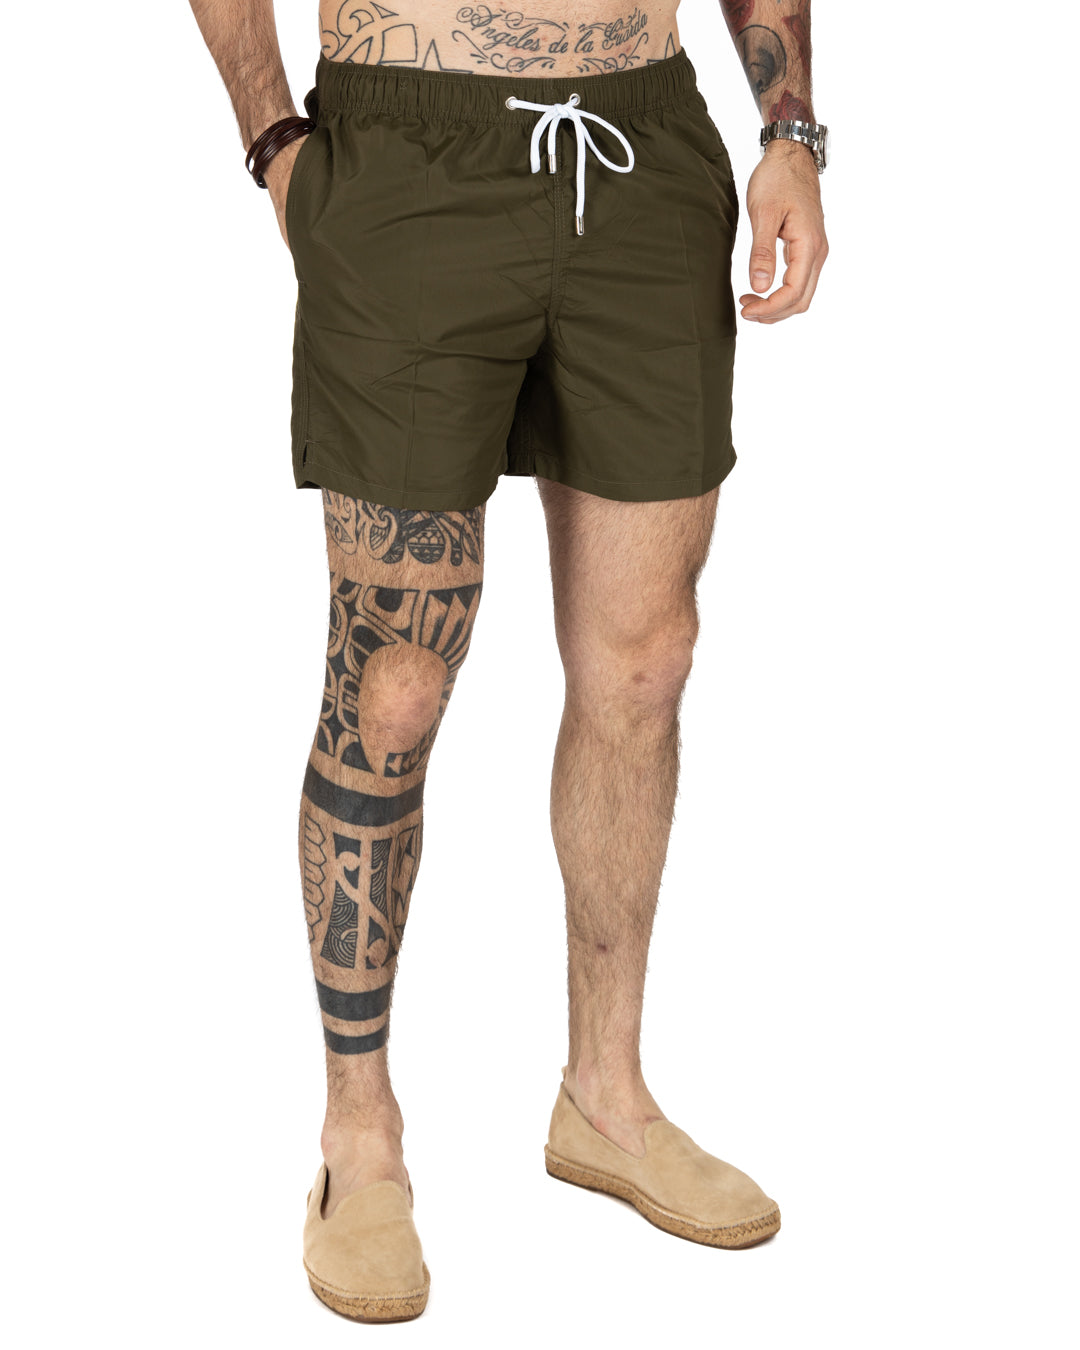 Maillot de bain - Solid Army Green